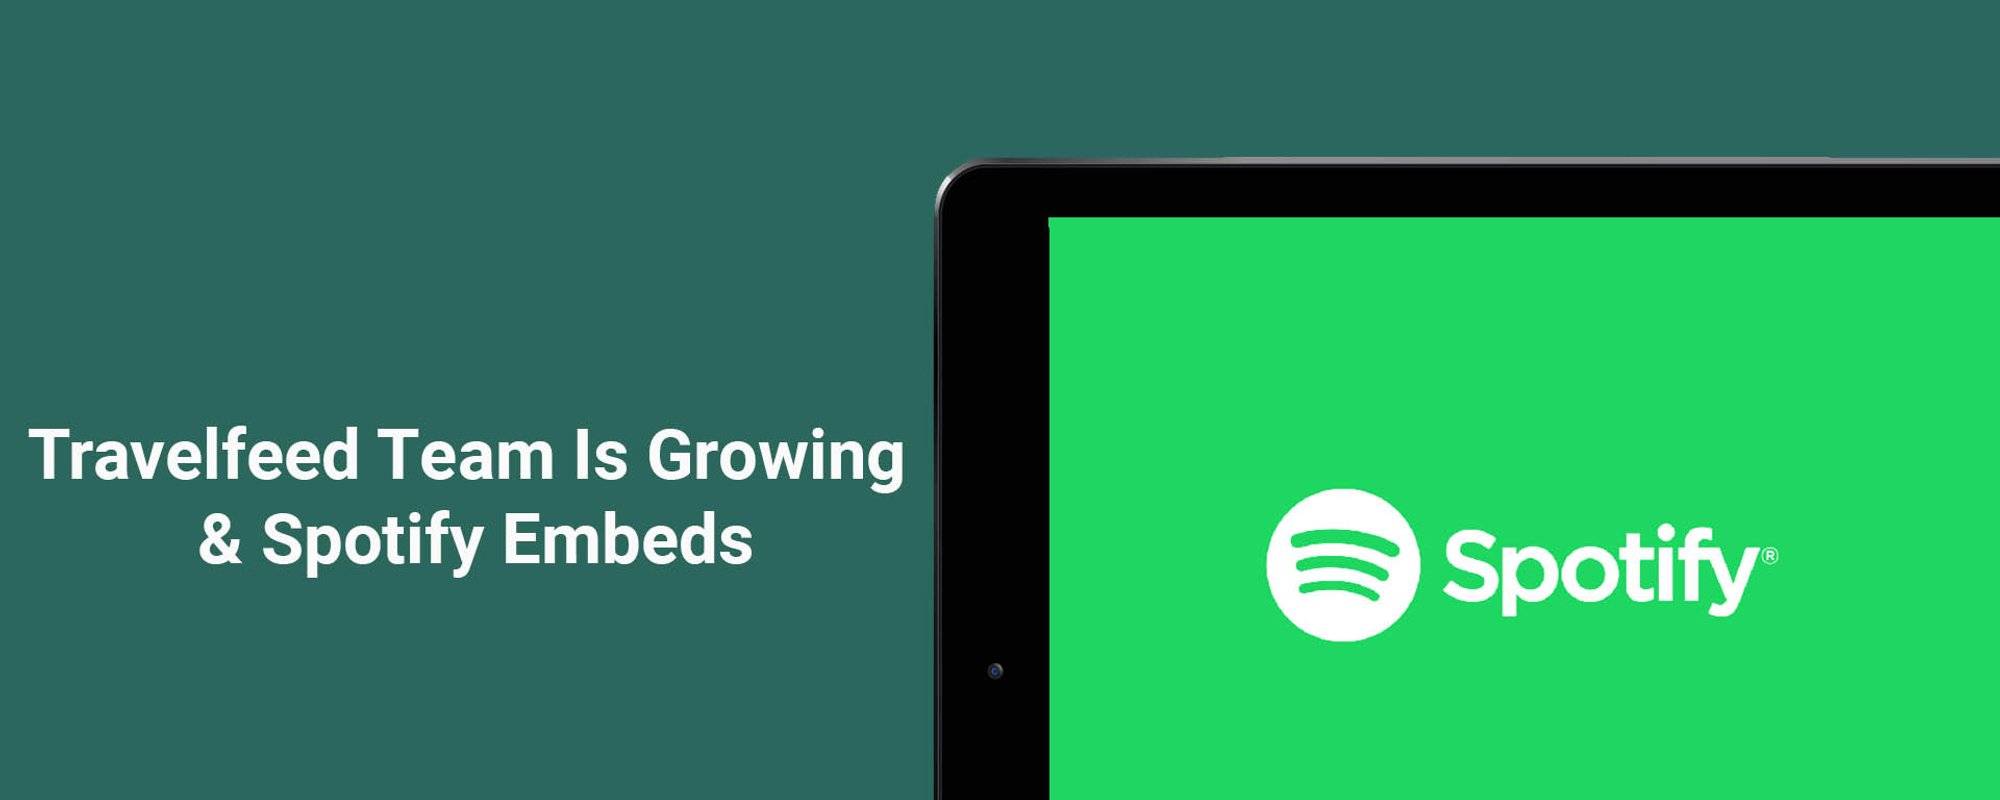 Travelfeed Team Is Growing & Spotify Embeds